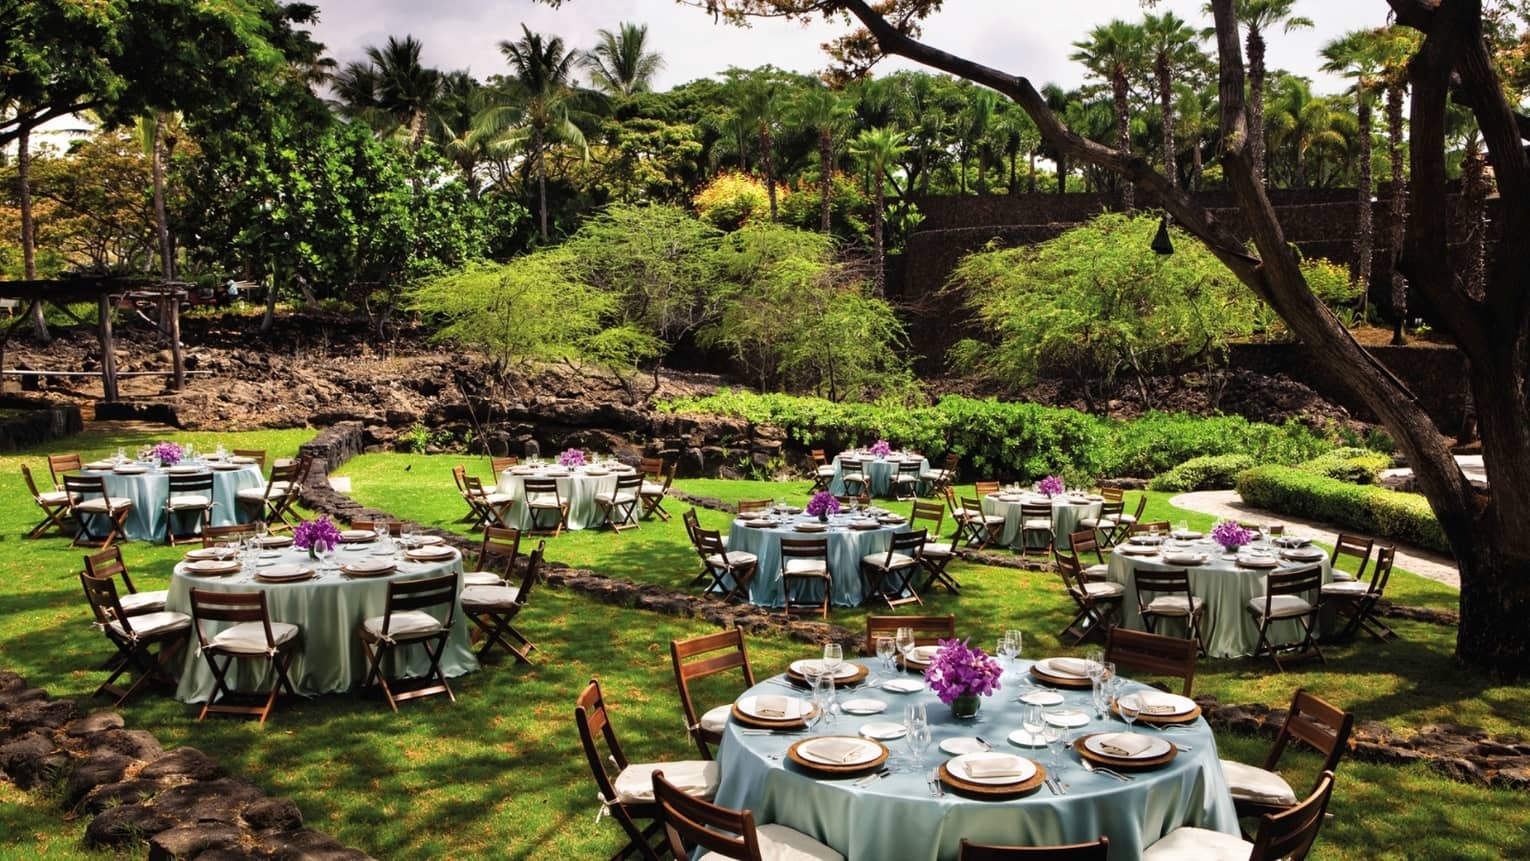 Hoku Amphitheater with round banquet tables under trees in lush garden event lawn